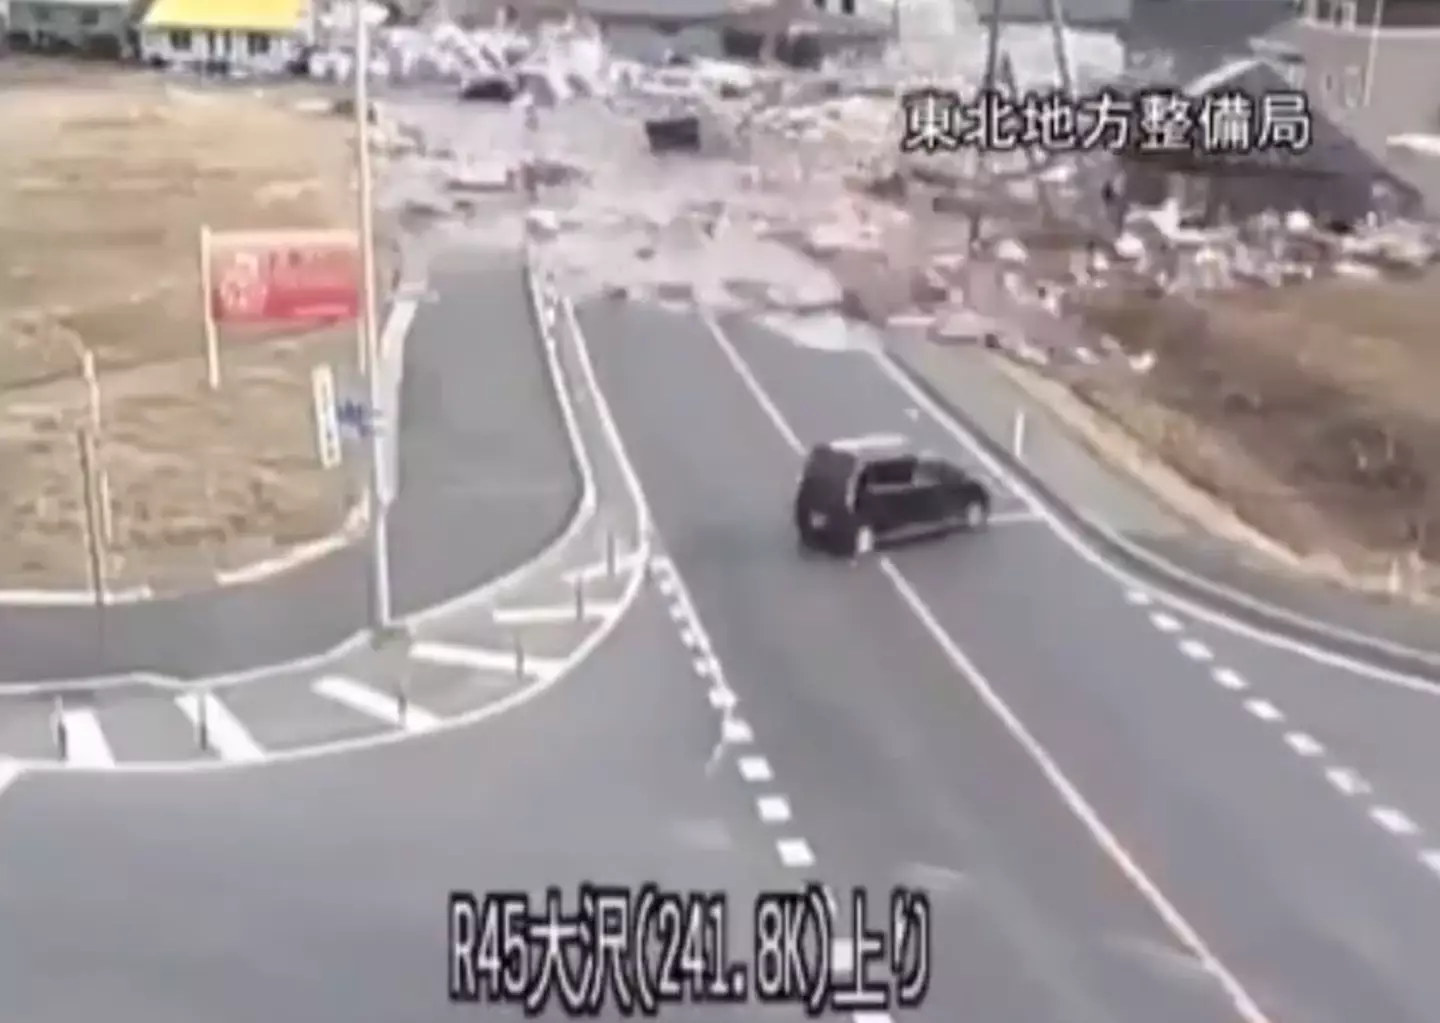 The car narrowly managed to escape from disaster.